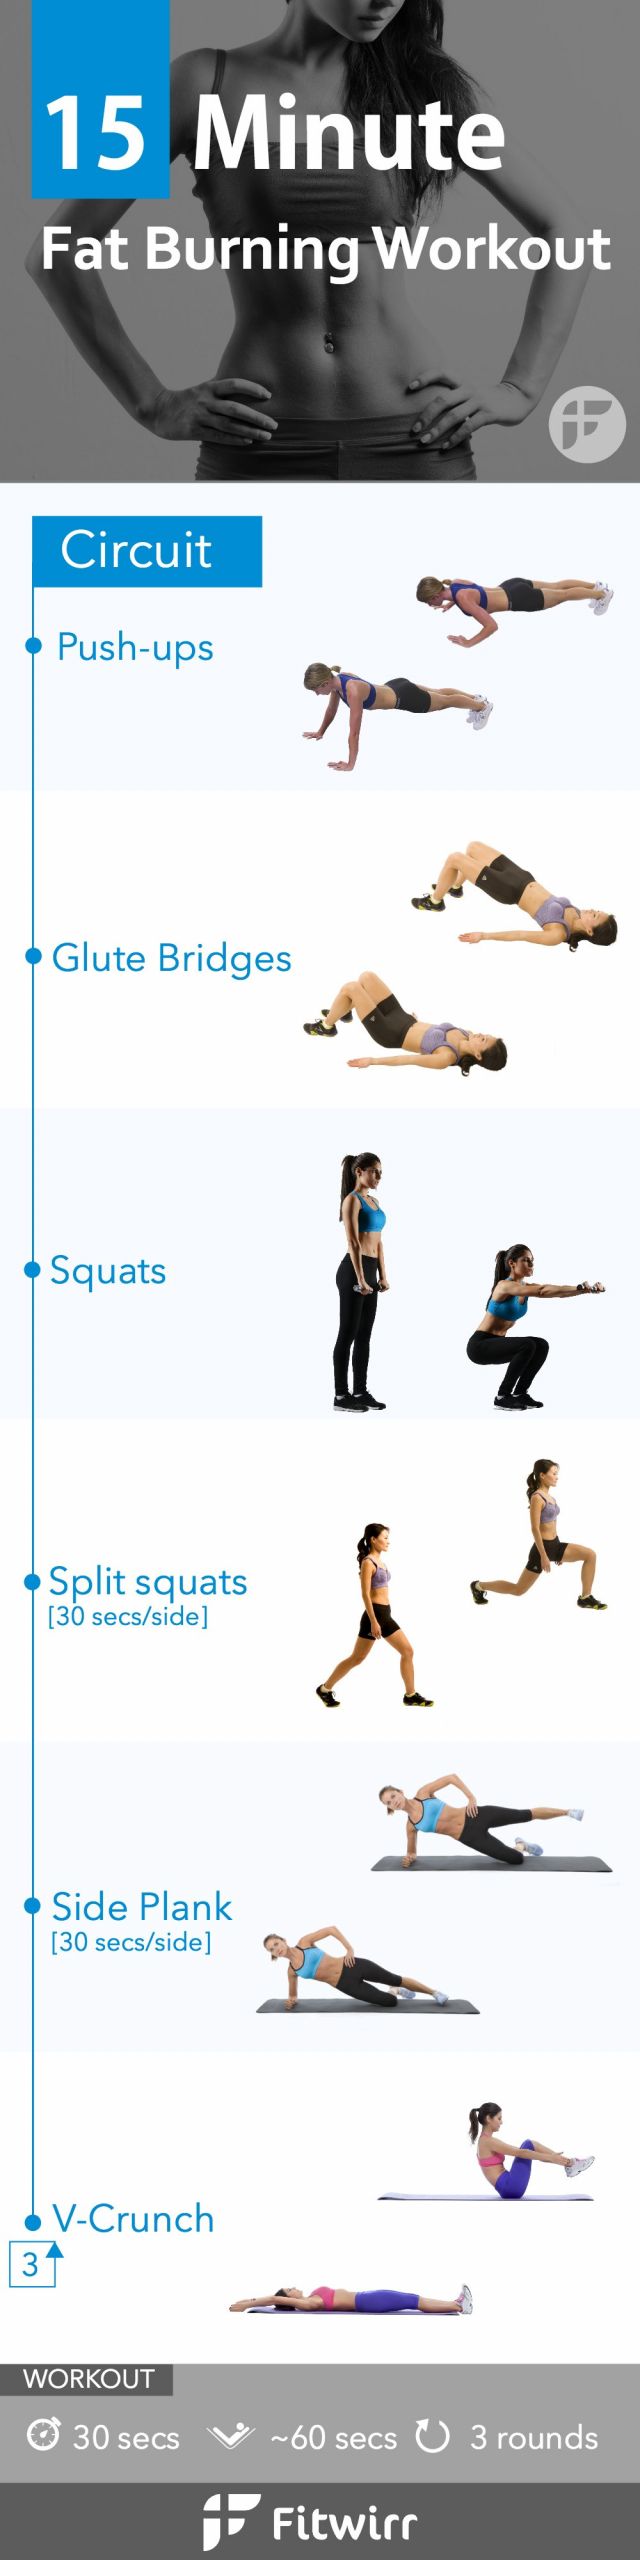 Simple Fat Burning Workouts
 15 Minute Bodyweight Fat Loss Workout for Women